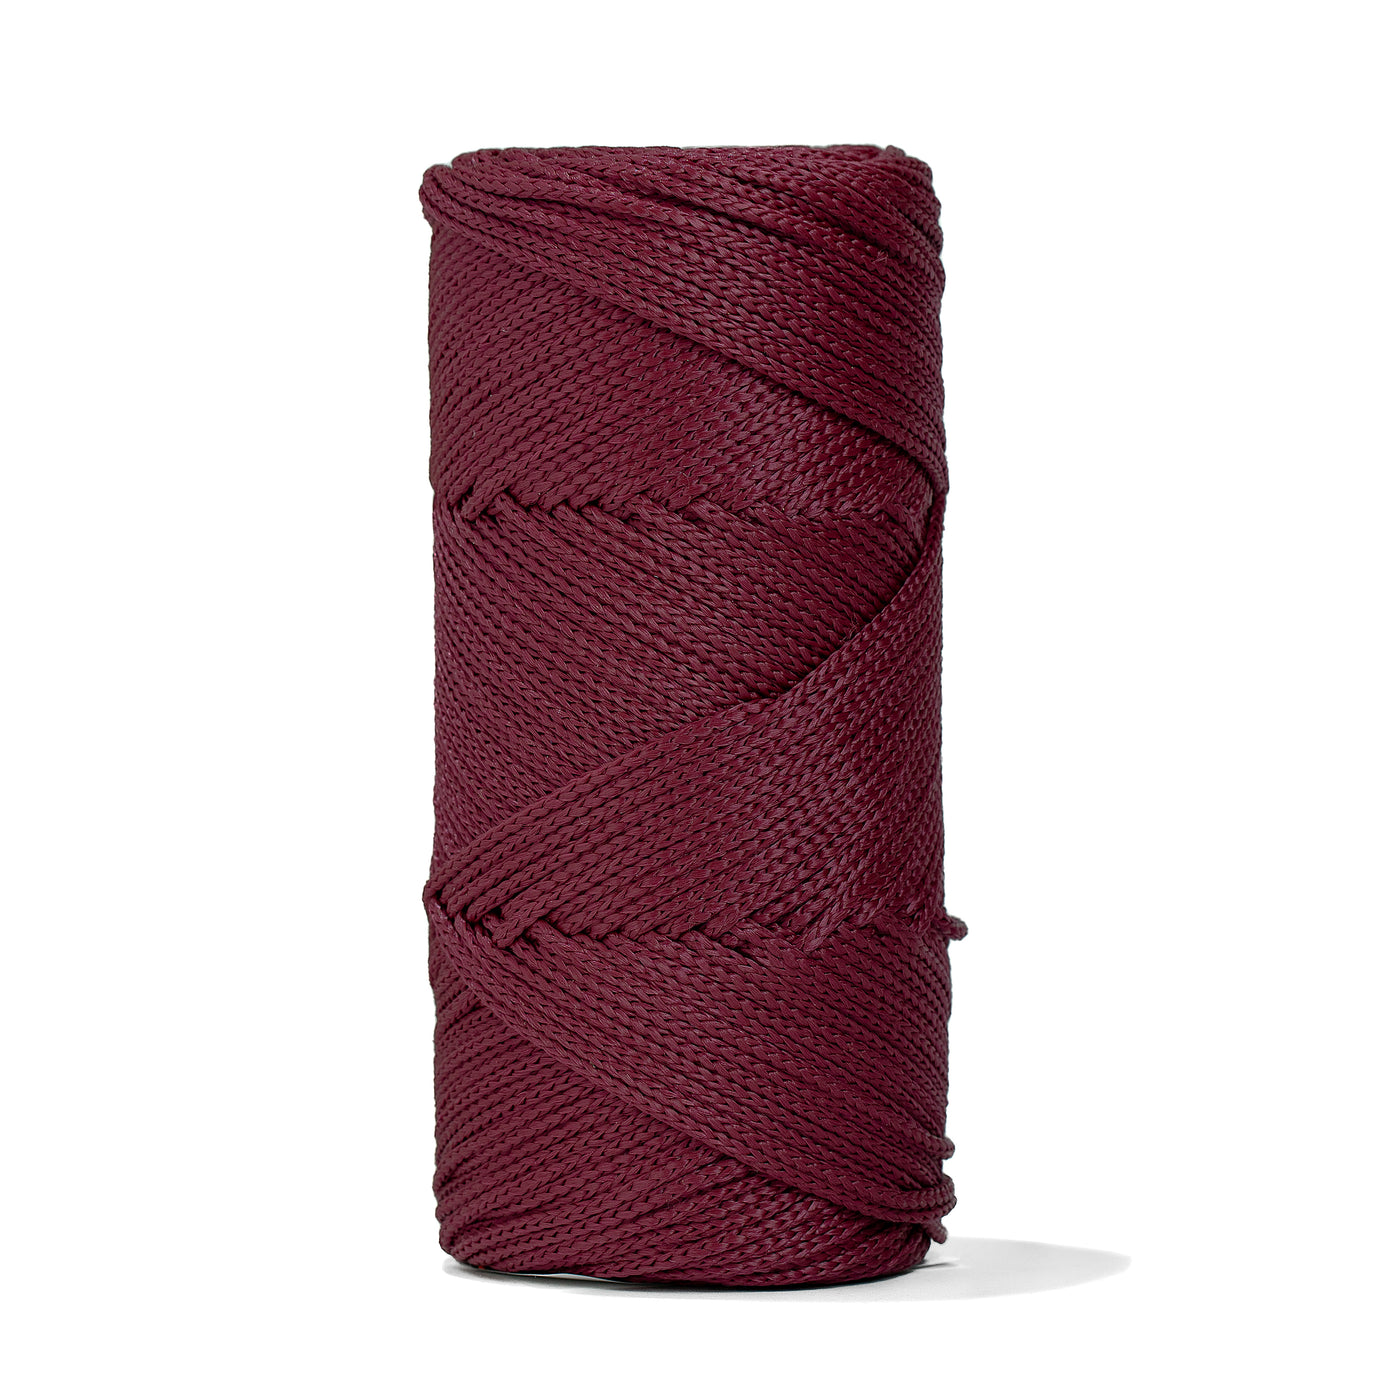 Outdoor 3 mm Macrame Braided Cord – Burgundy Color